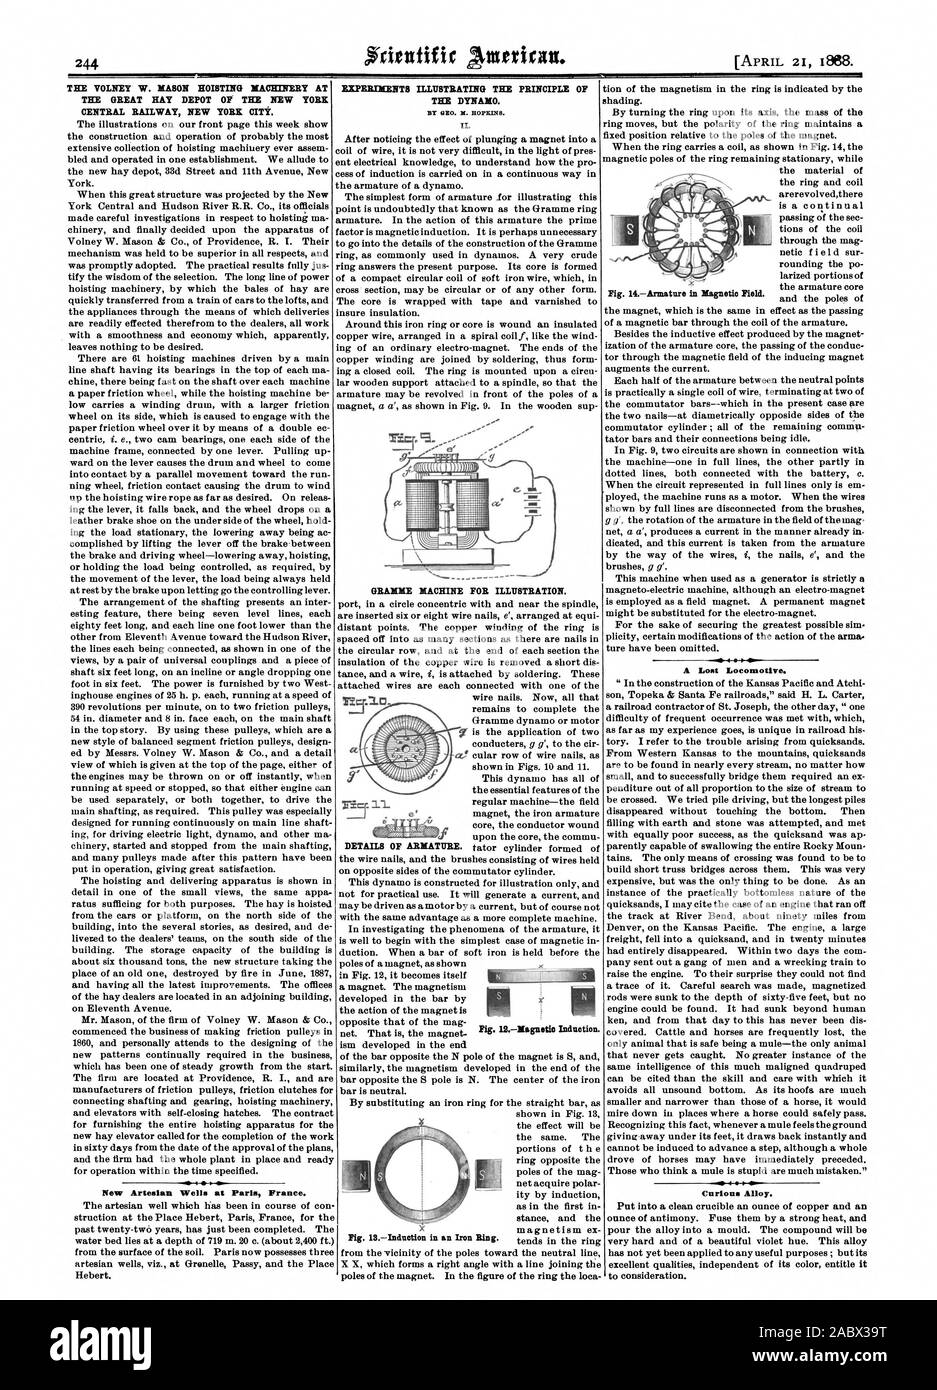 THE VOLNEY W. MASON HOISTING MACHINERY AT THE GREAT HAY DEPOT OF THE NEW YORK CENTRAL RAILWAY NEW YOKE CITY. New Artesian Wells at Paris France. EXPERIMENTS ILLUSTRATING TEE PRINCIPLE OF THE DYNAMO. BY GEO. X. HOPKINS. GRAMME MACHINE FOR ILLUSTRATION. DETAILS OF ARMATURE., scientific american, 1888-04-21 Stock Photo